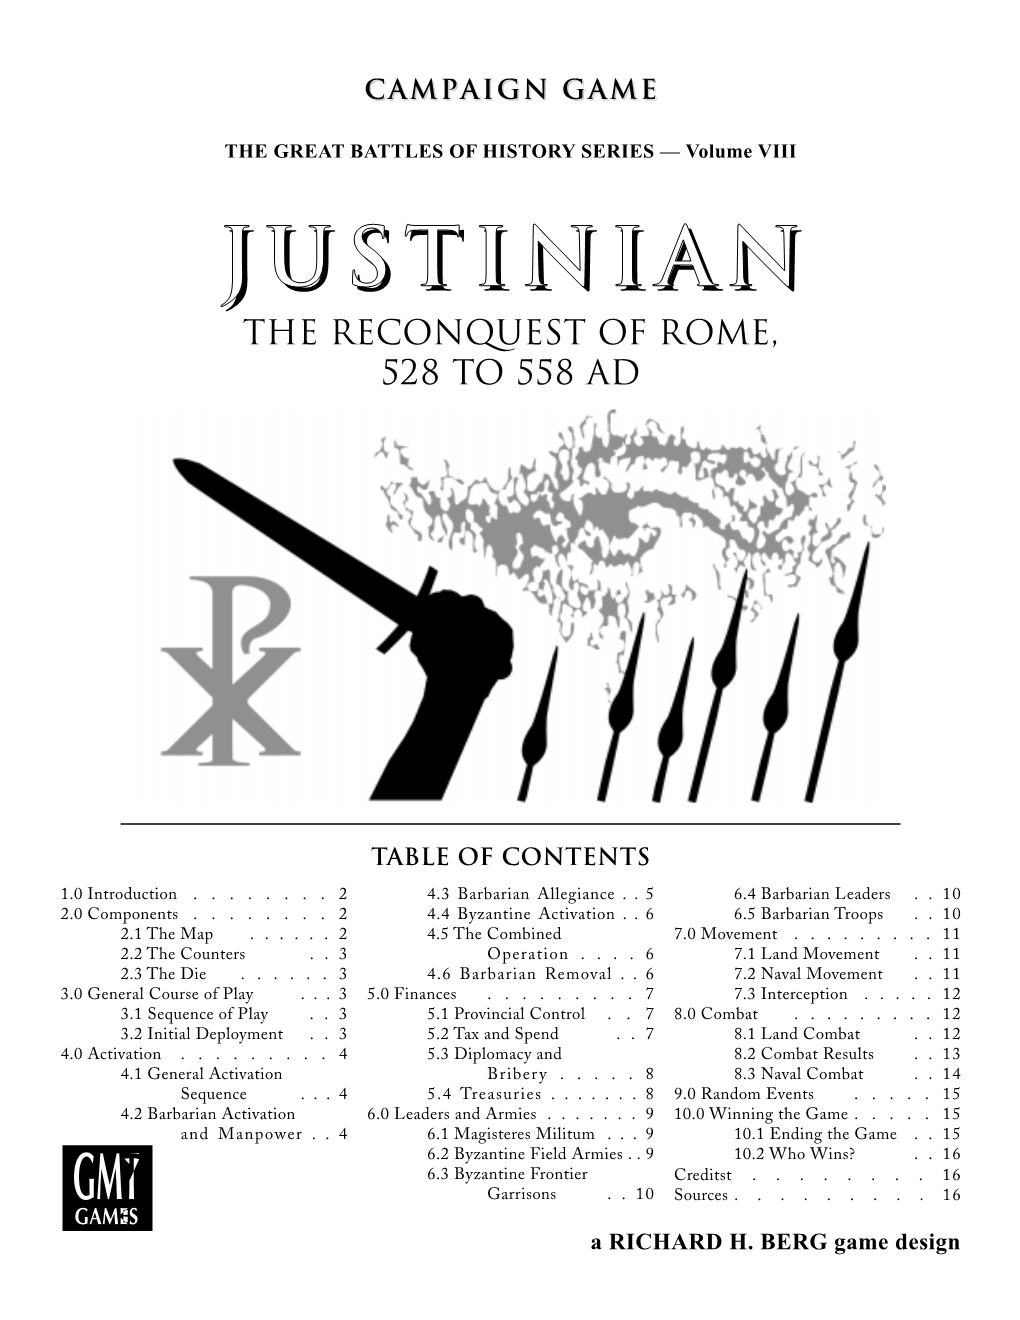 JUSTINIANJUSTINIAN the Reconquest of Rome, 528 to 558 AD